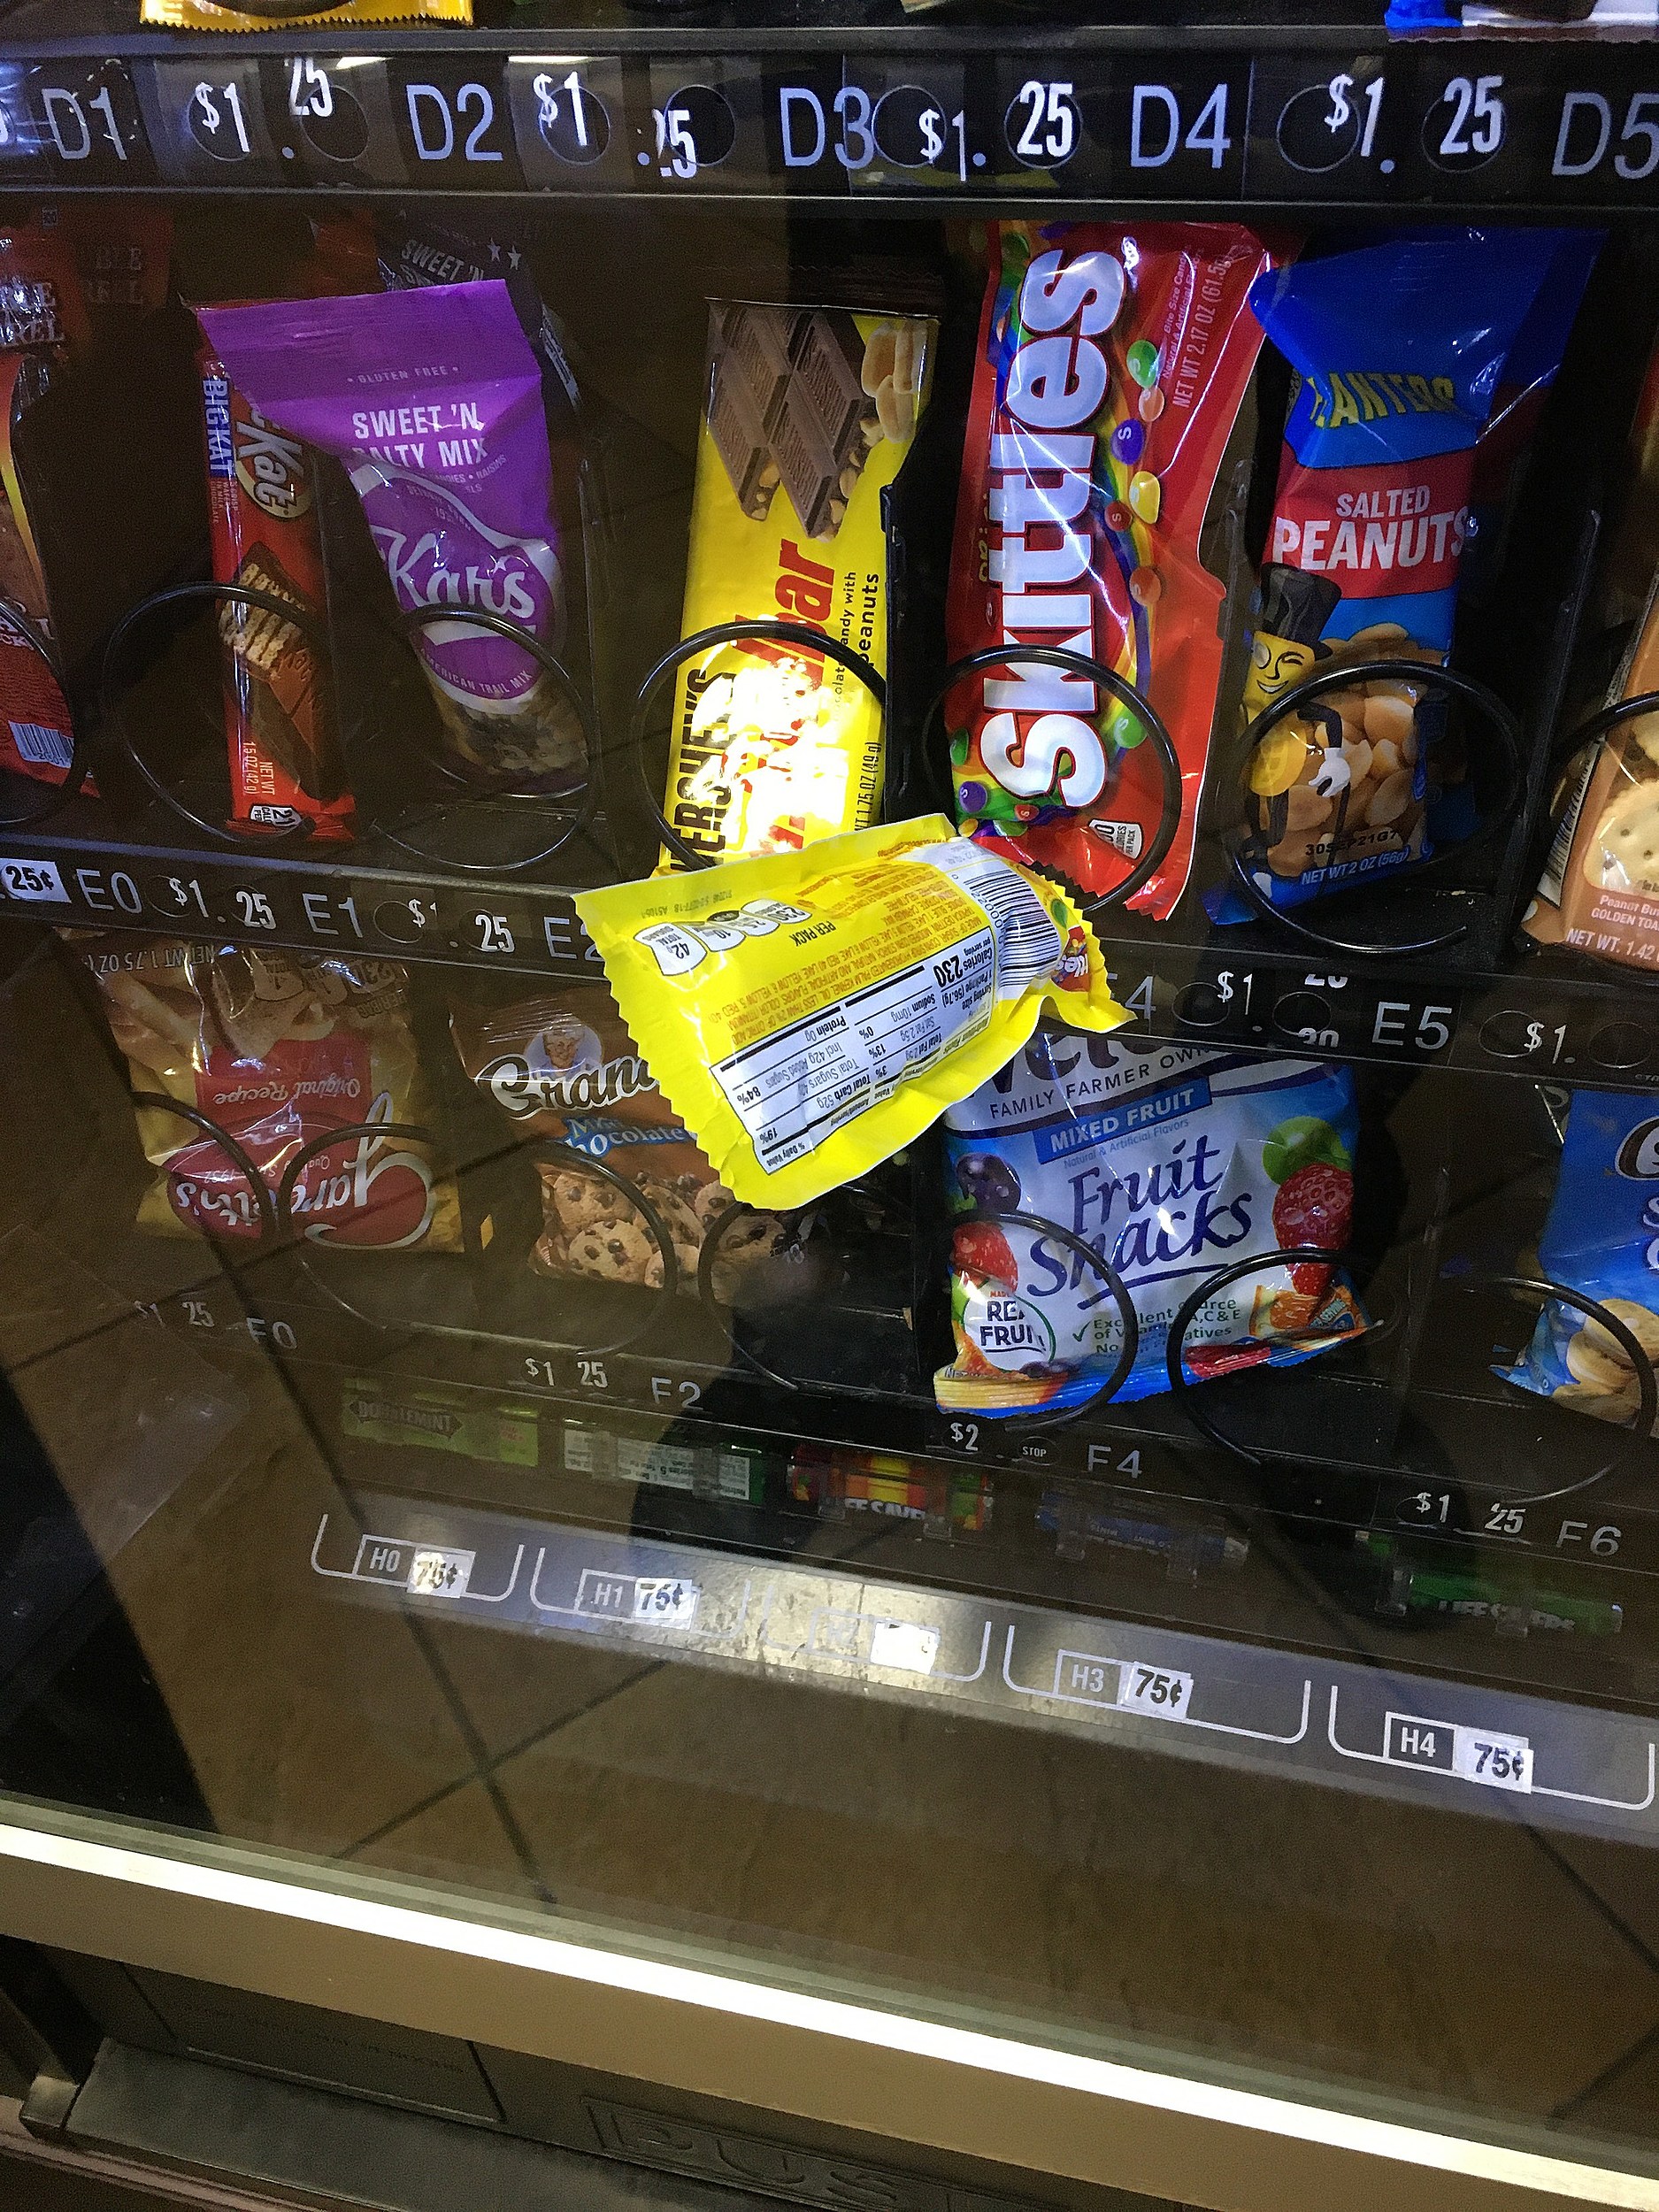 4 bags of pop corn stuck in the vending machine. You can only see